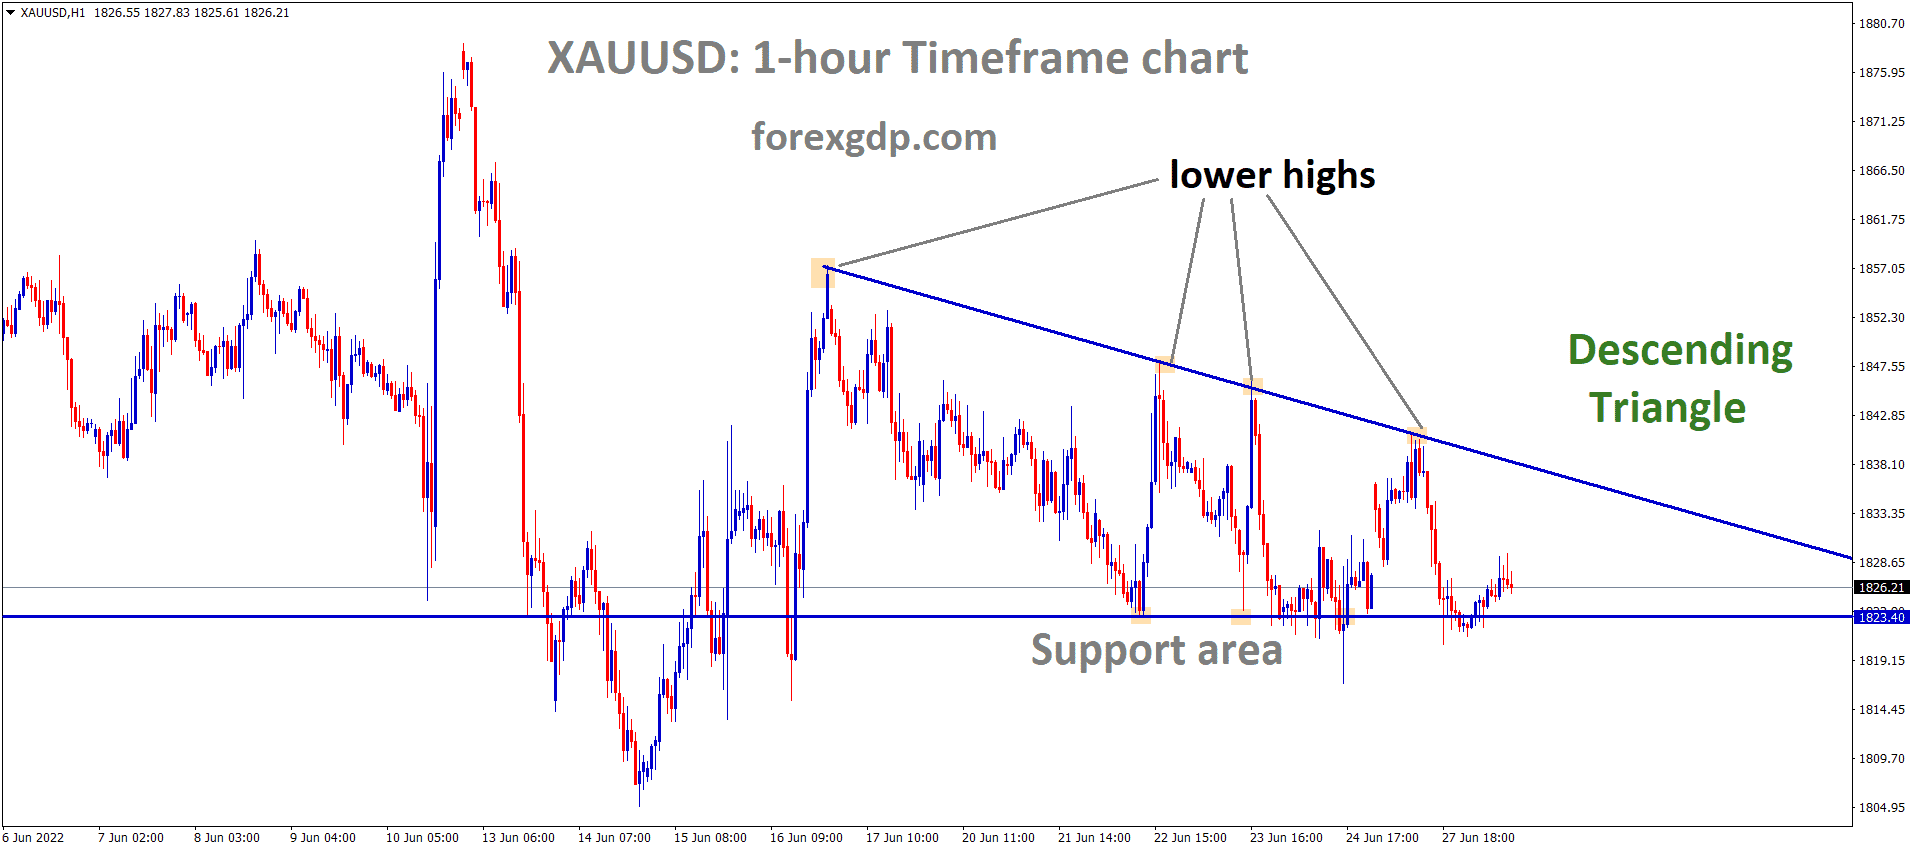 XAUUSD Gold price is moving in the Descending triangle pattern